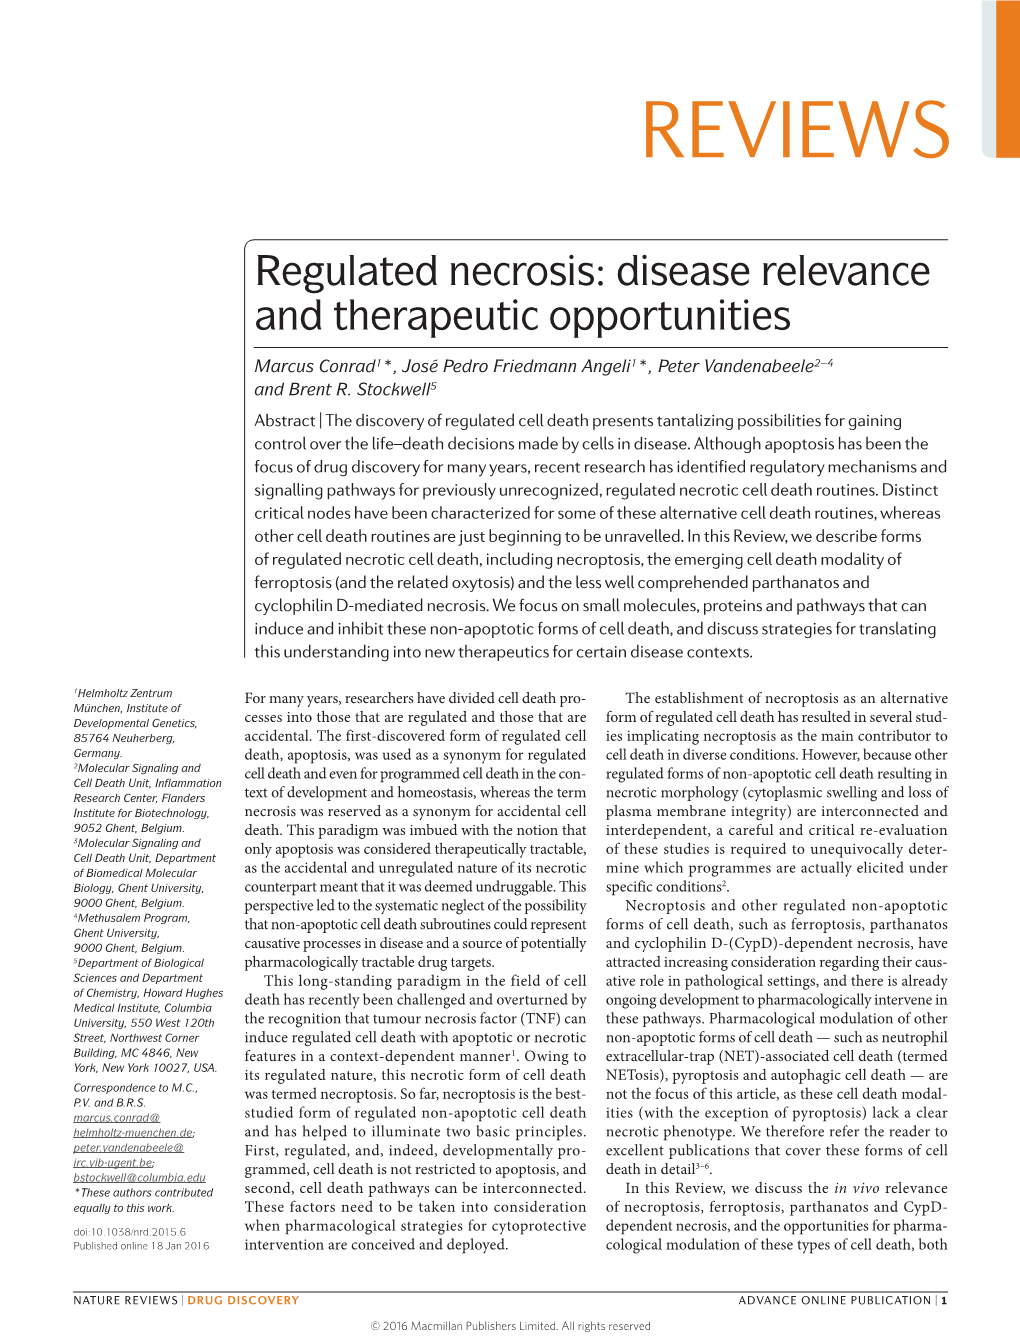 Regulated Necrosis: Disease Relevance and Therapeutic Opportunities